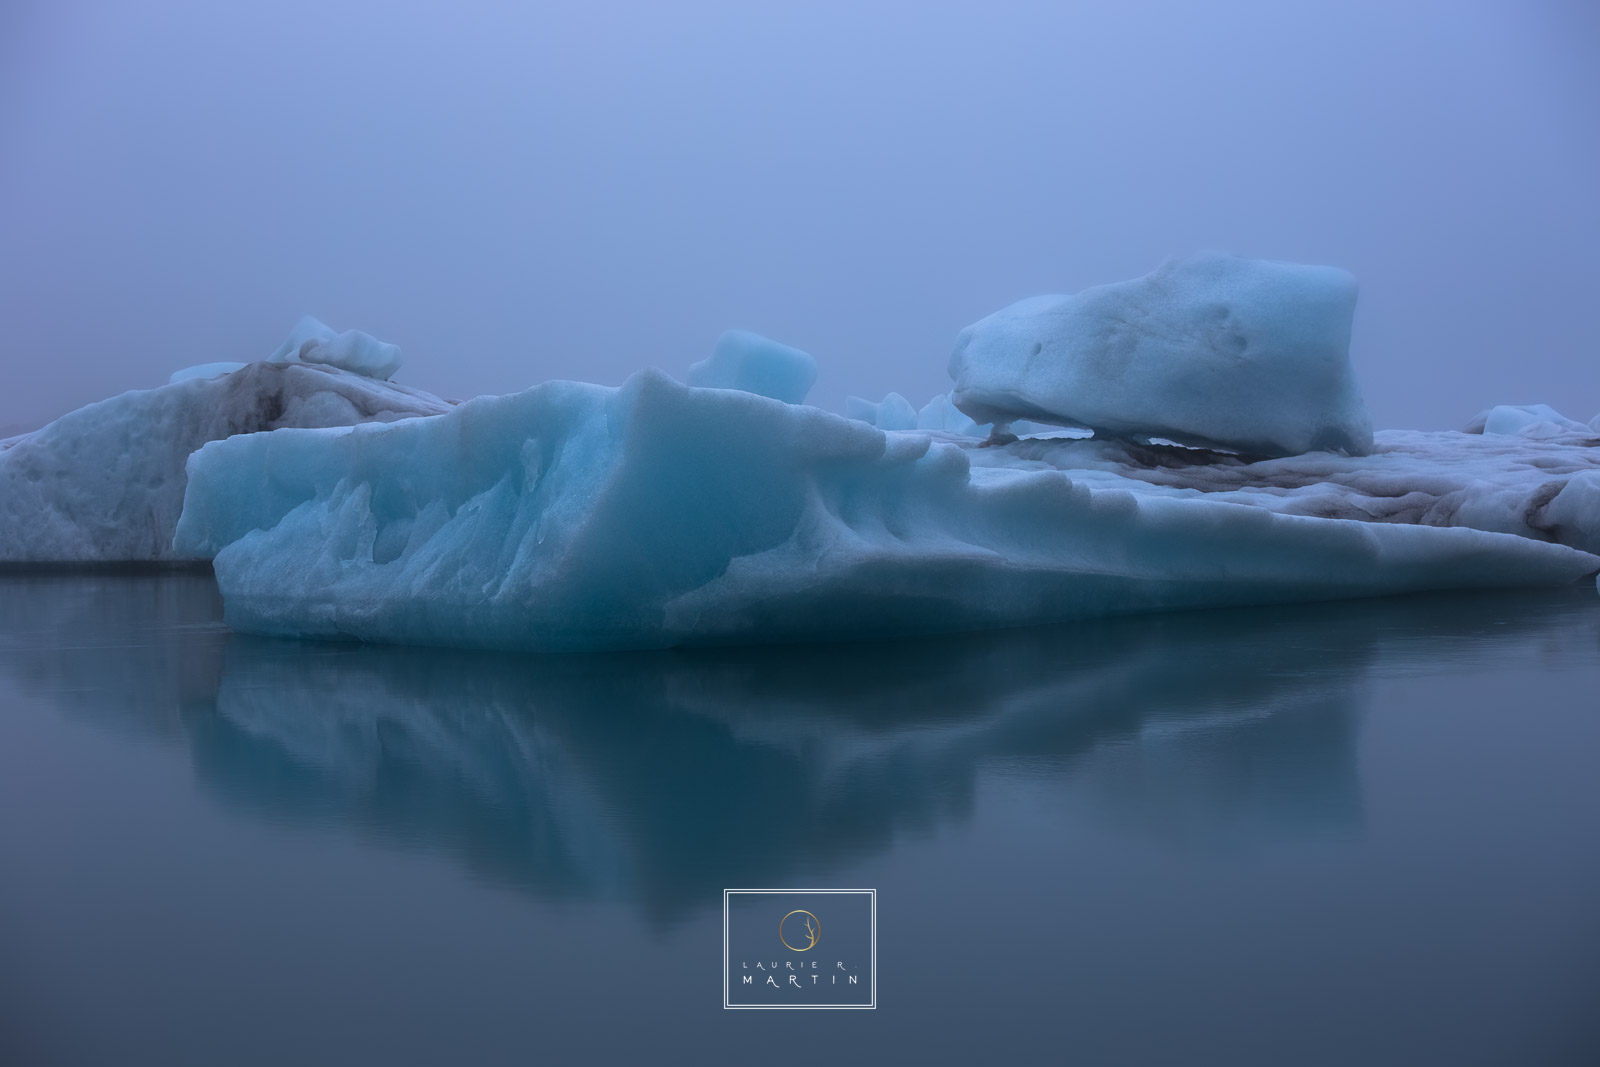 This was one of most favorite places to shoot hands down. What a sight! Ice structures piling up on the shoreline in Iceland....